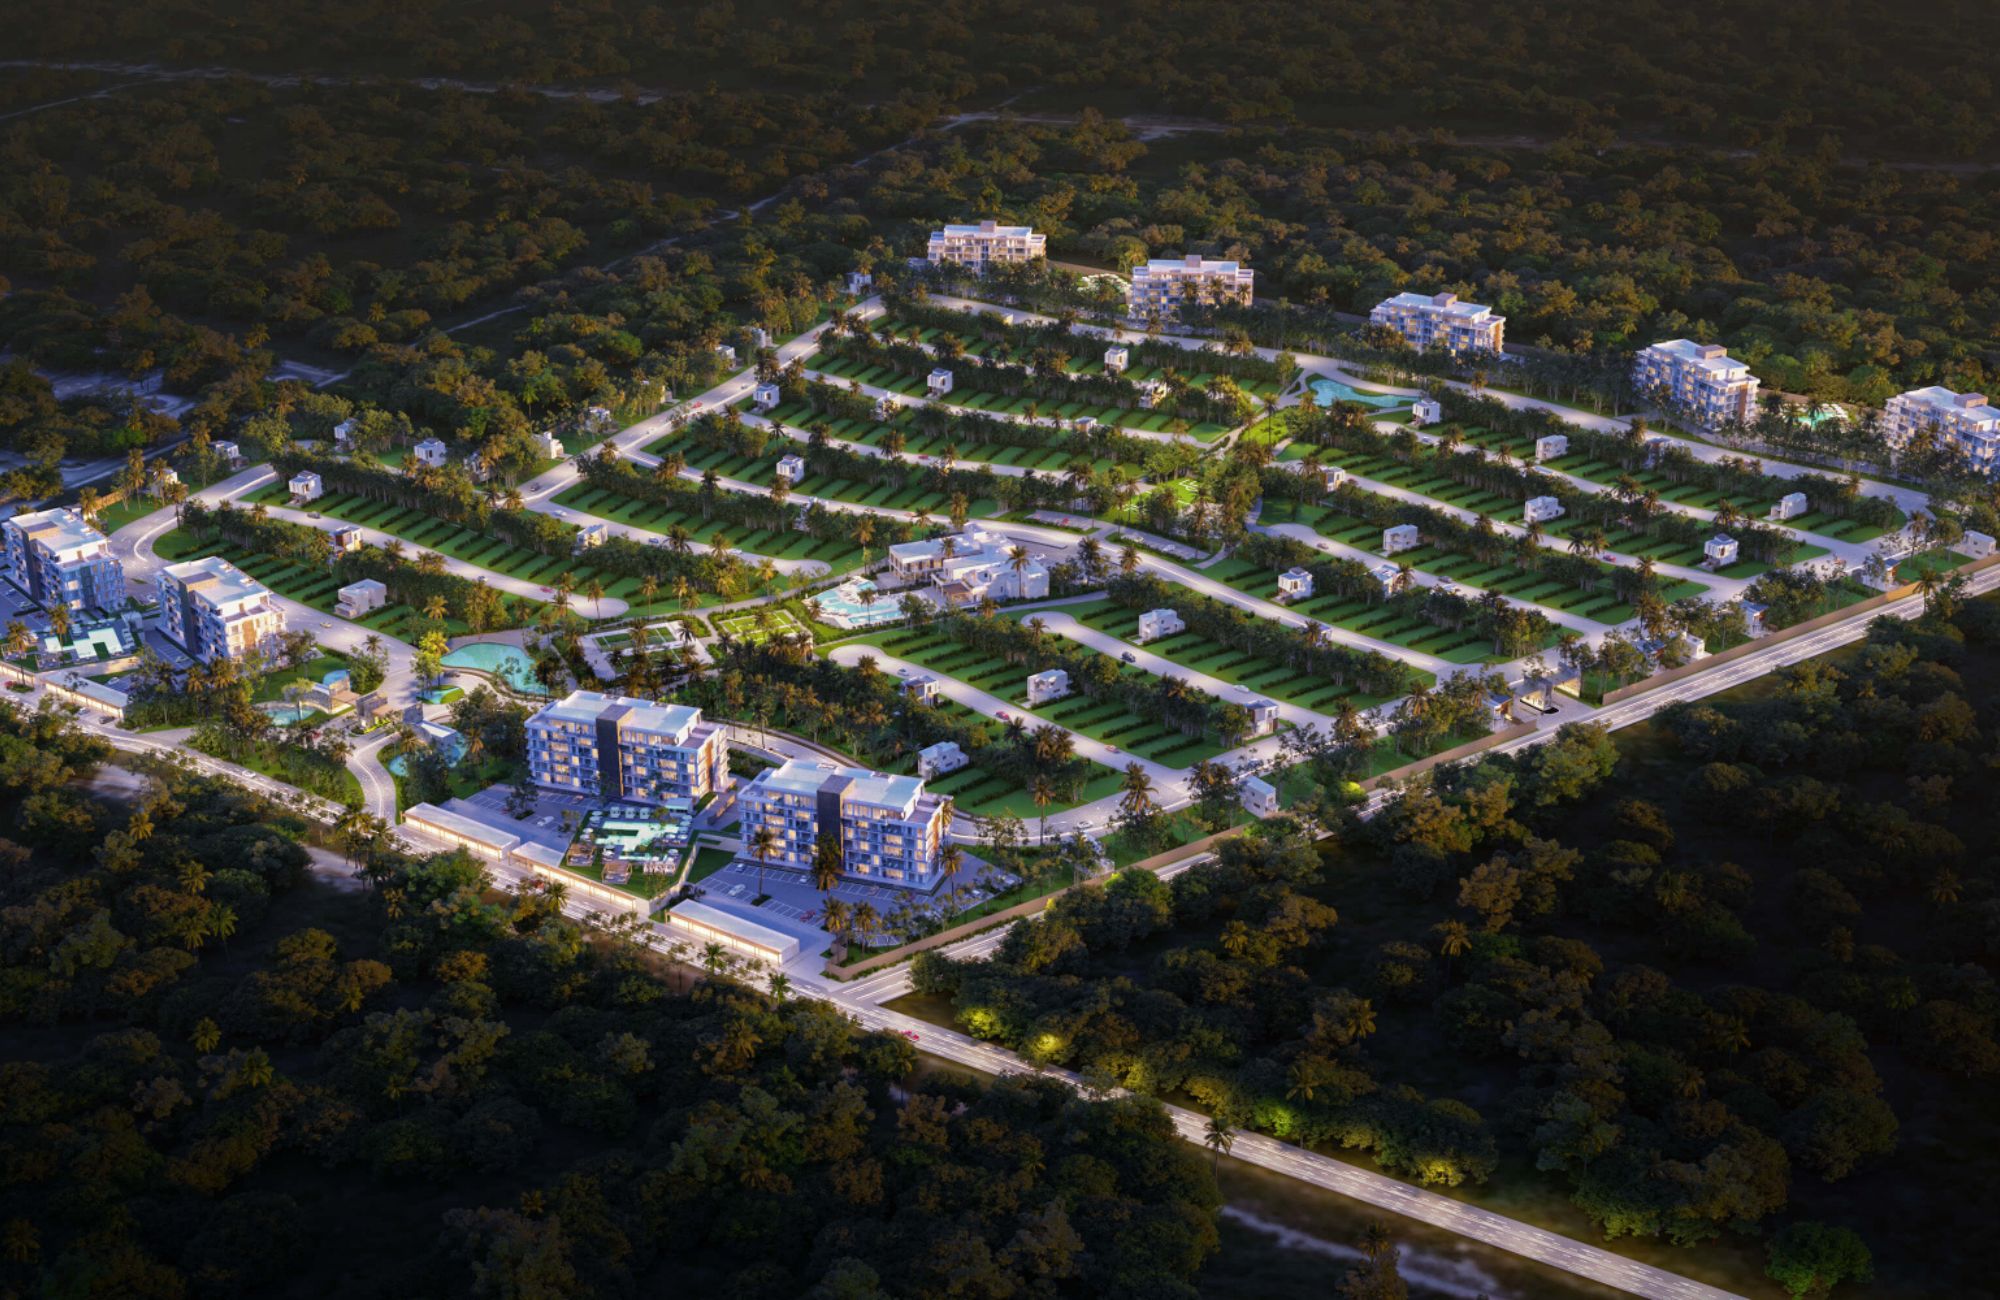 Land in a private residential area with a clubhouse, sports courts, pool, dog areas and more for sale Playa del Carmen.